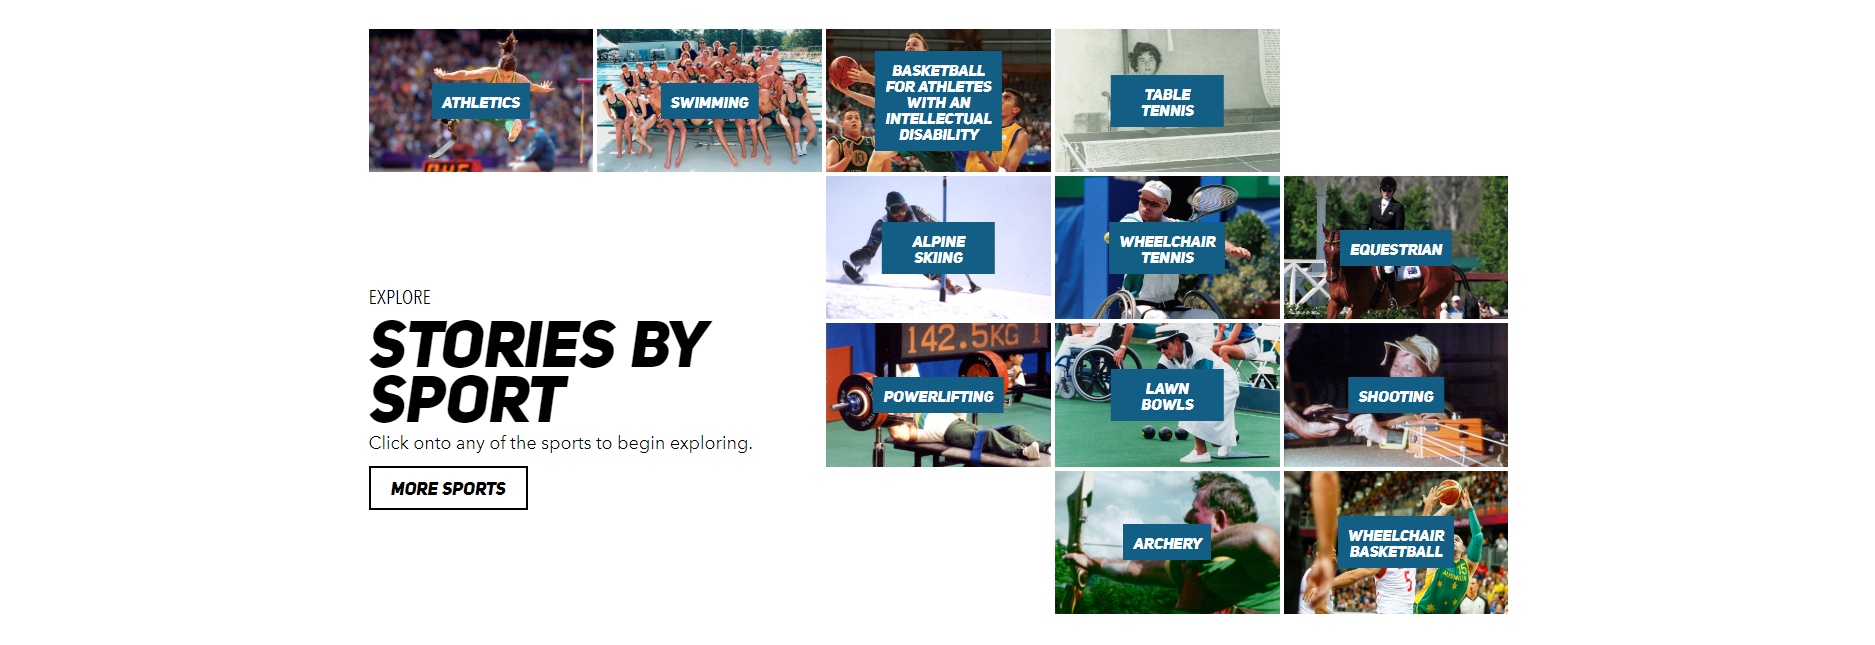 The online history can allow visitors to explore through sports or themes ©Paralympics Australia